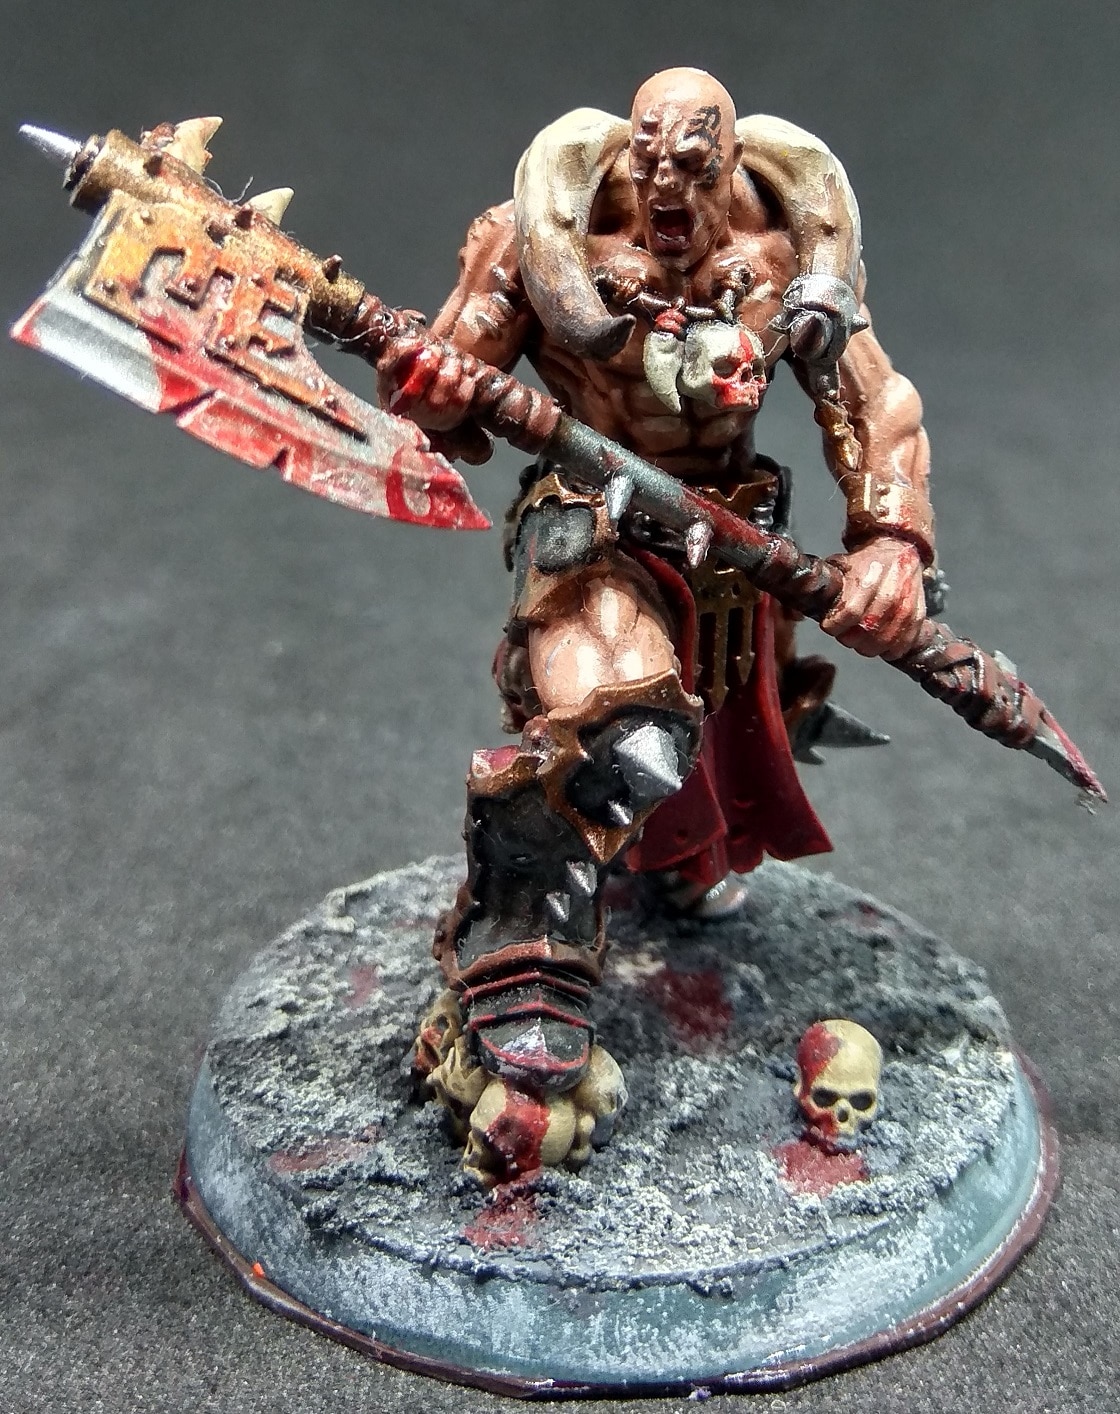 Kazgrim Bloodspawn – High Priest of Slaughter, the Unyielding